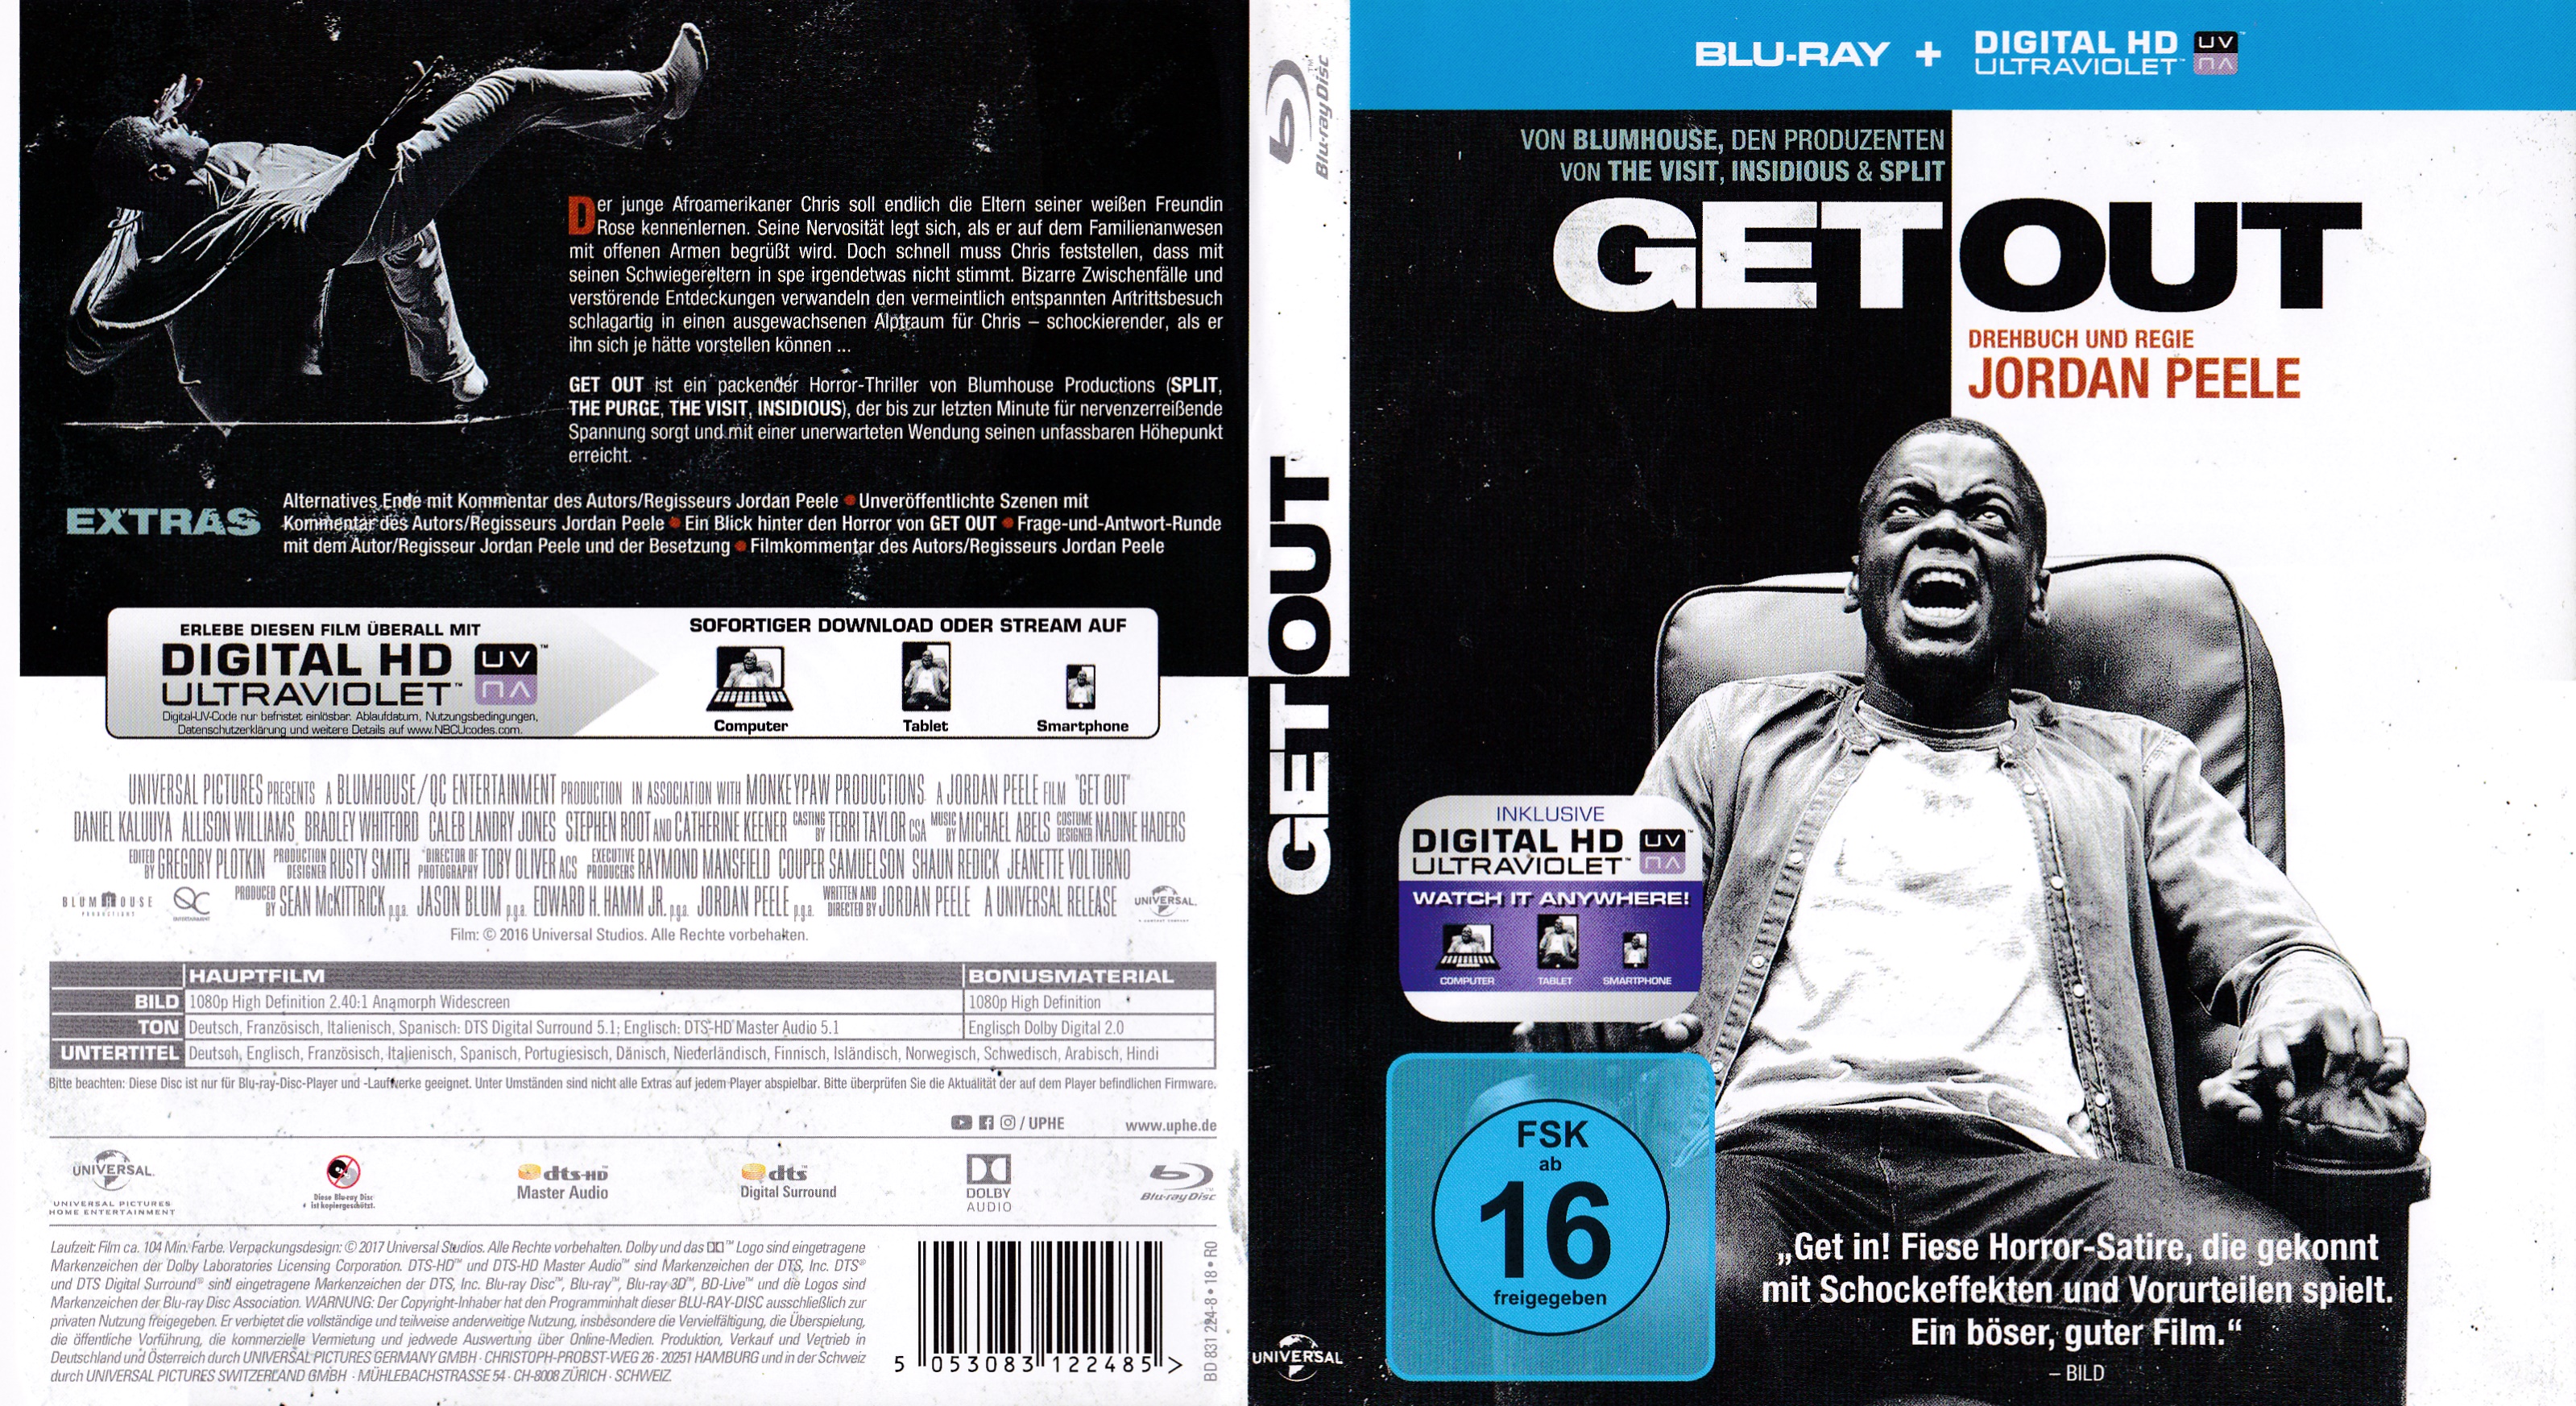 Jaquette DVD Get Out (BLU-RAY) v2